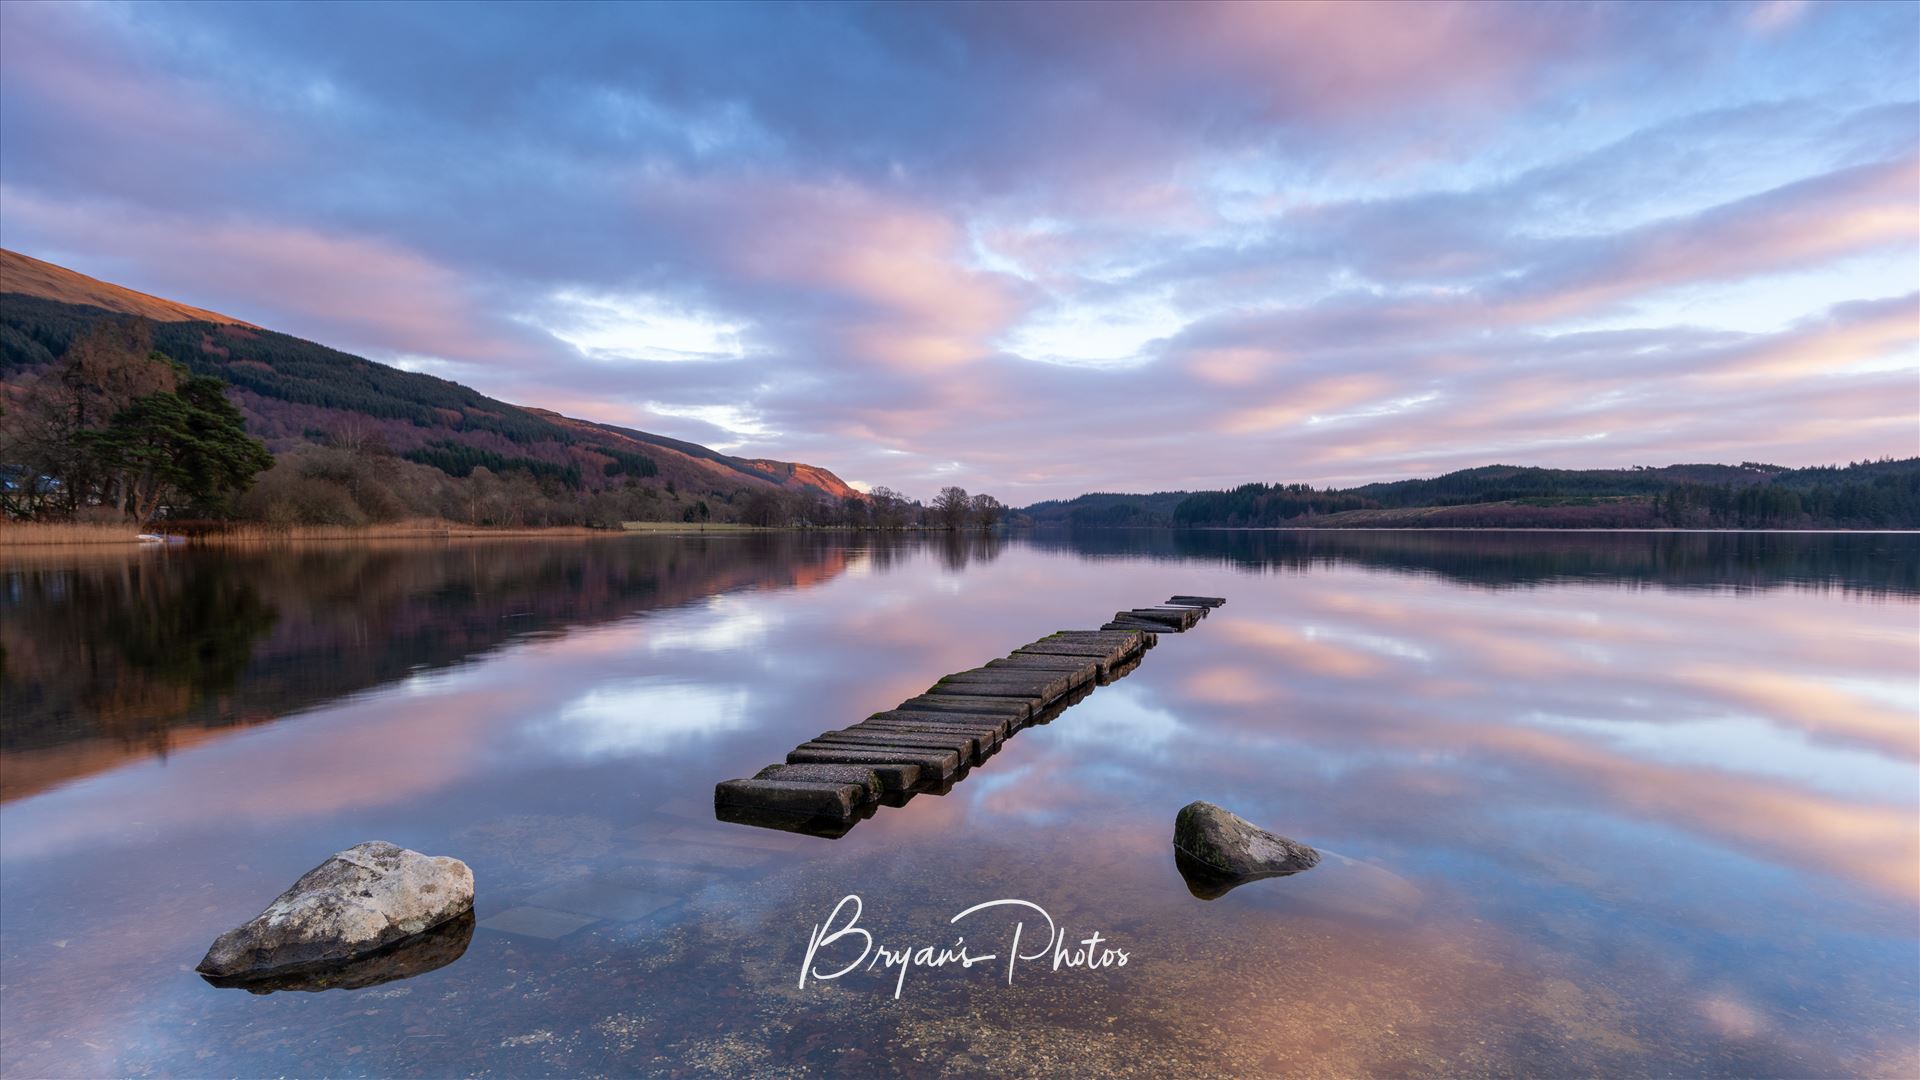 Winter at Loch Ard. A photograph of the disused jetty at Loch Ard. by Bryans Photos